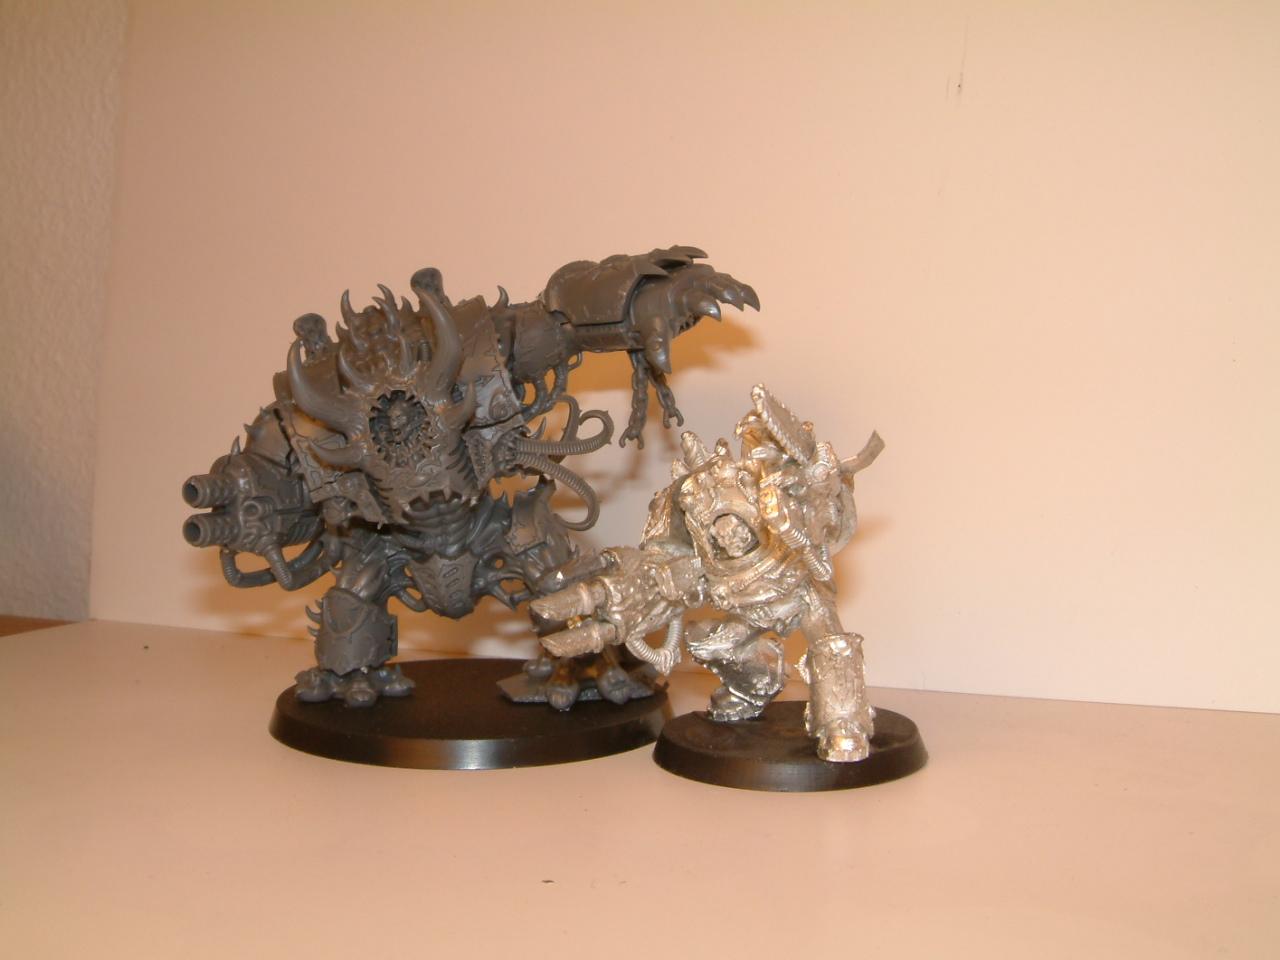 Chaos, Conversion, Crazy, Daemons, Dreadnought, Hands, Ih, Iron, Kill, Mad, Mammon, Nurgle, Parts, Sarkophagus, Scratch, Scratch Build, Space, Space Marines, Team, Work In Progress